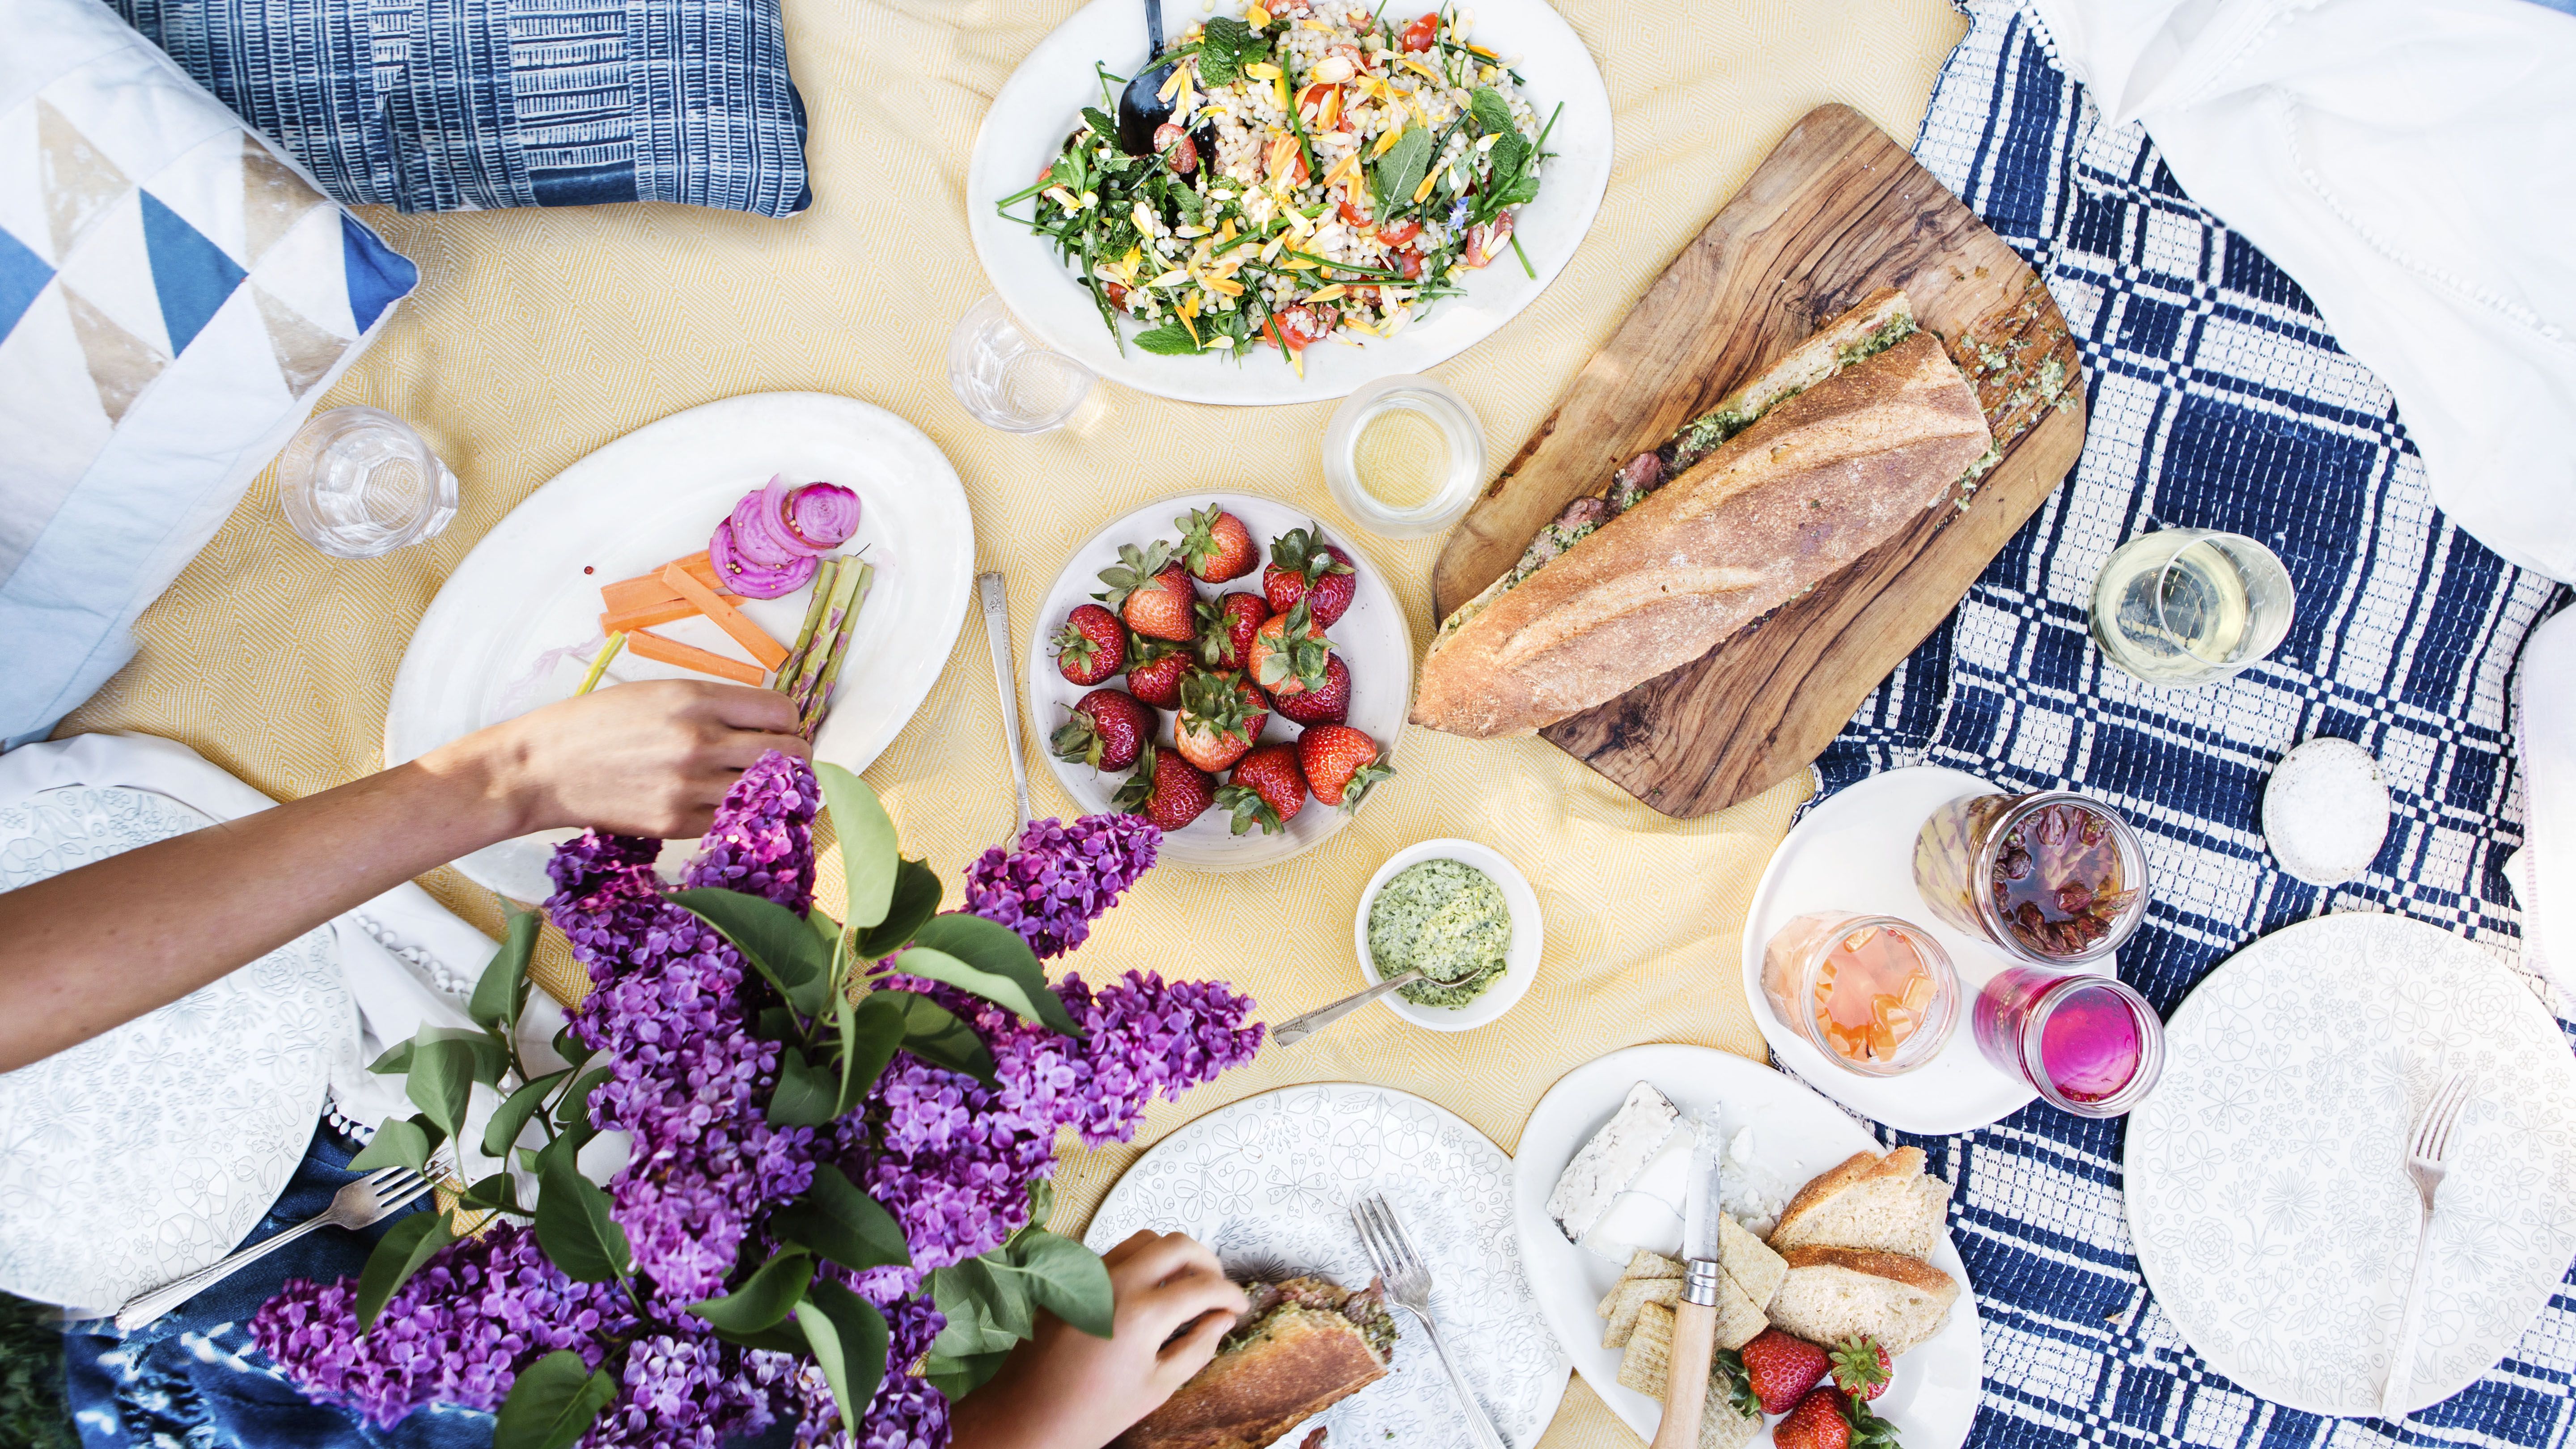 5 Easy Picnic Ideas for the Perfect Summer Day!